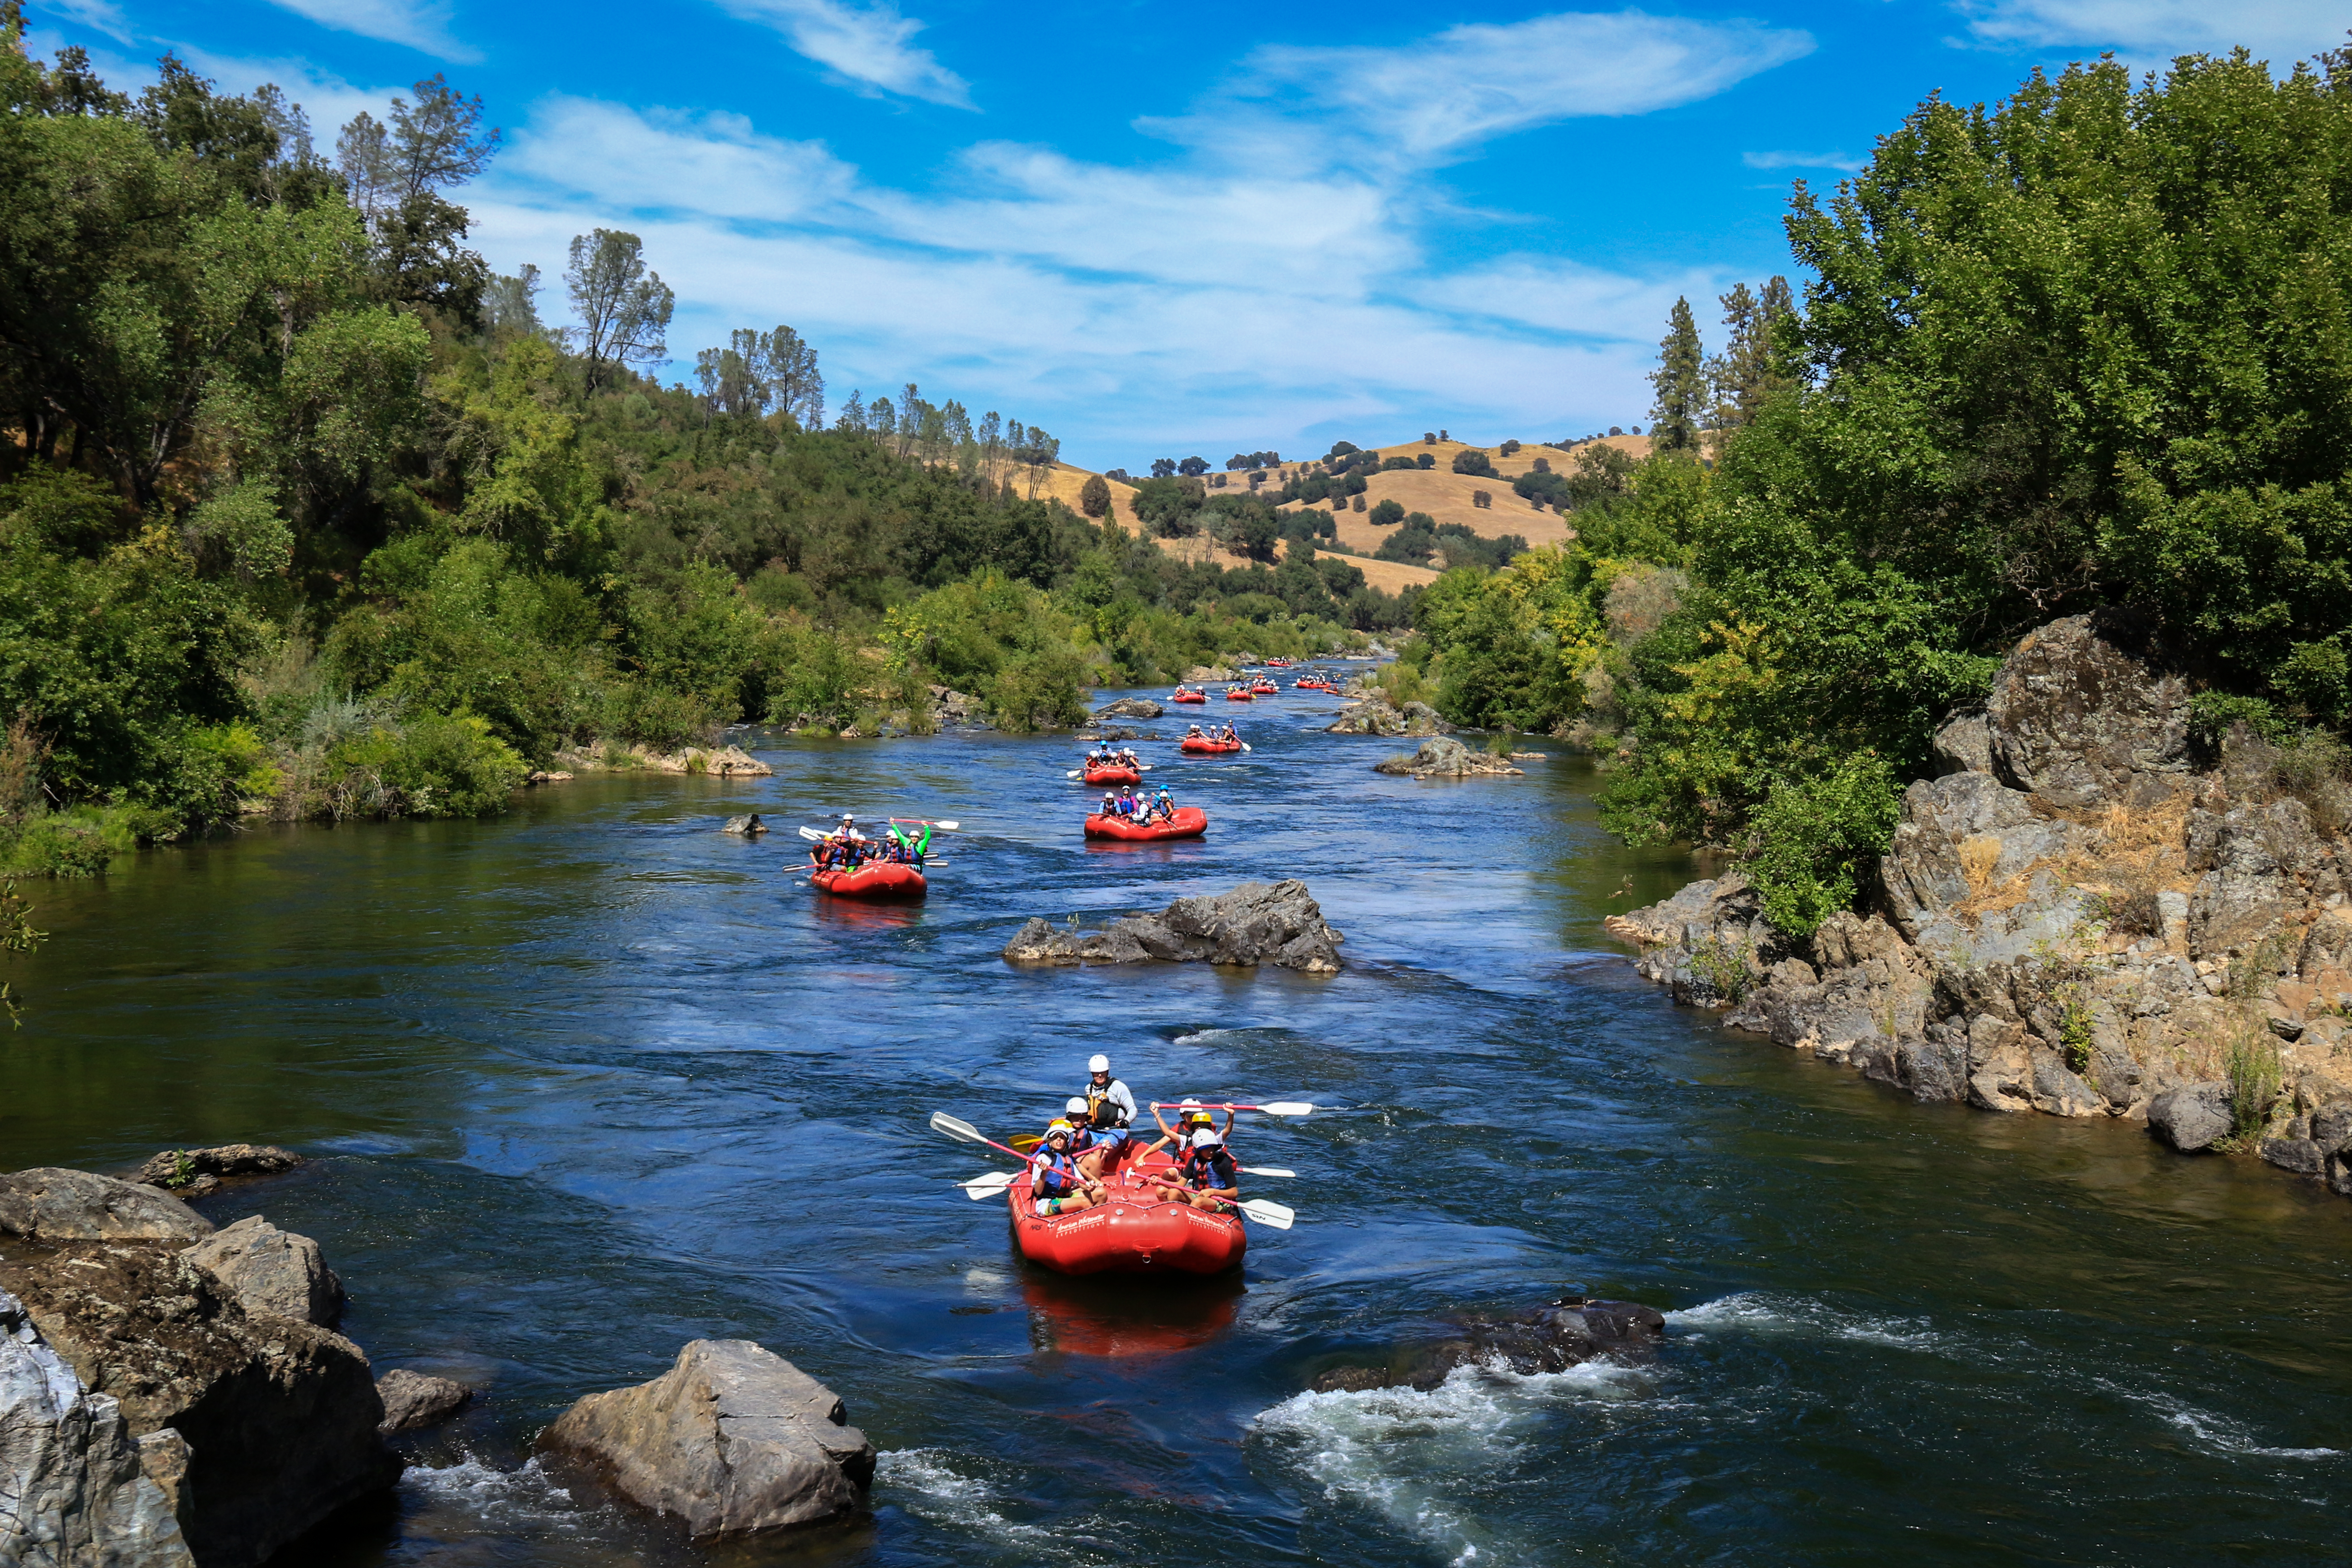 Rafts line up as they prepare to enter The South Fork Gorge. (American River, CA)